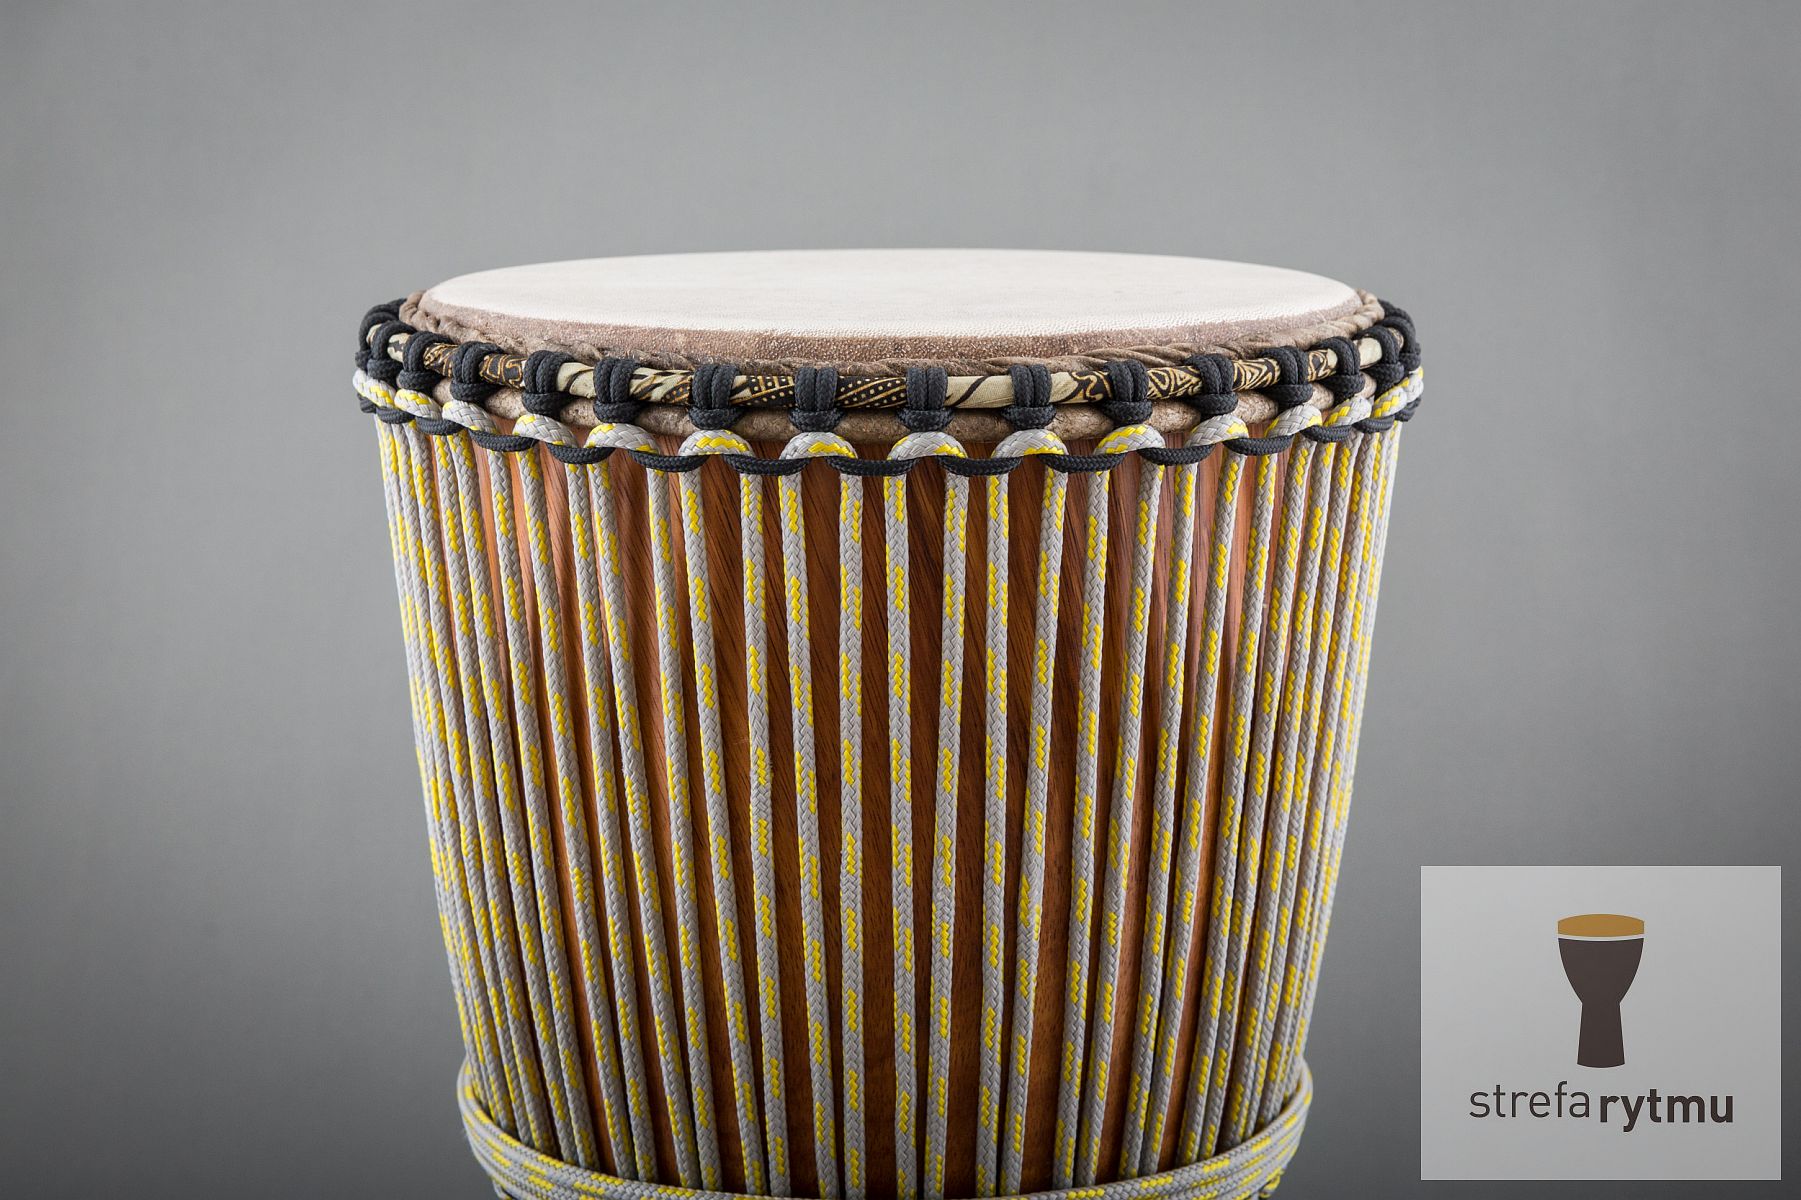 Extremely solid professional djembe from Mali. Strongly recomended for those looking for djembe up to 32cm diameter